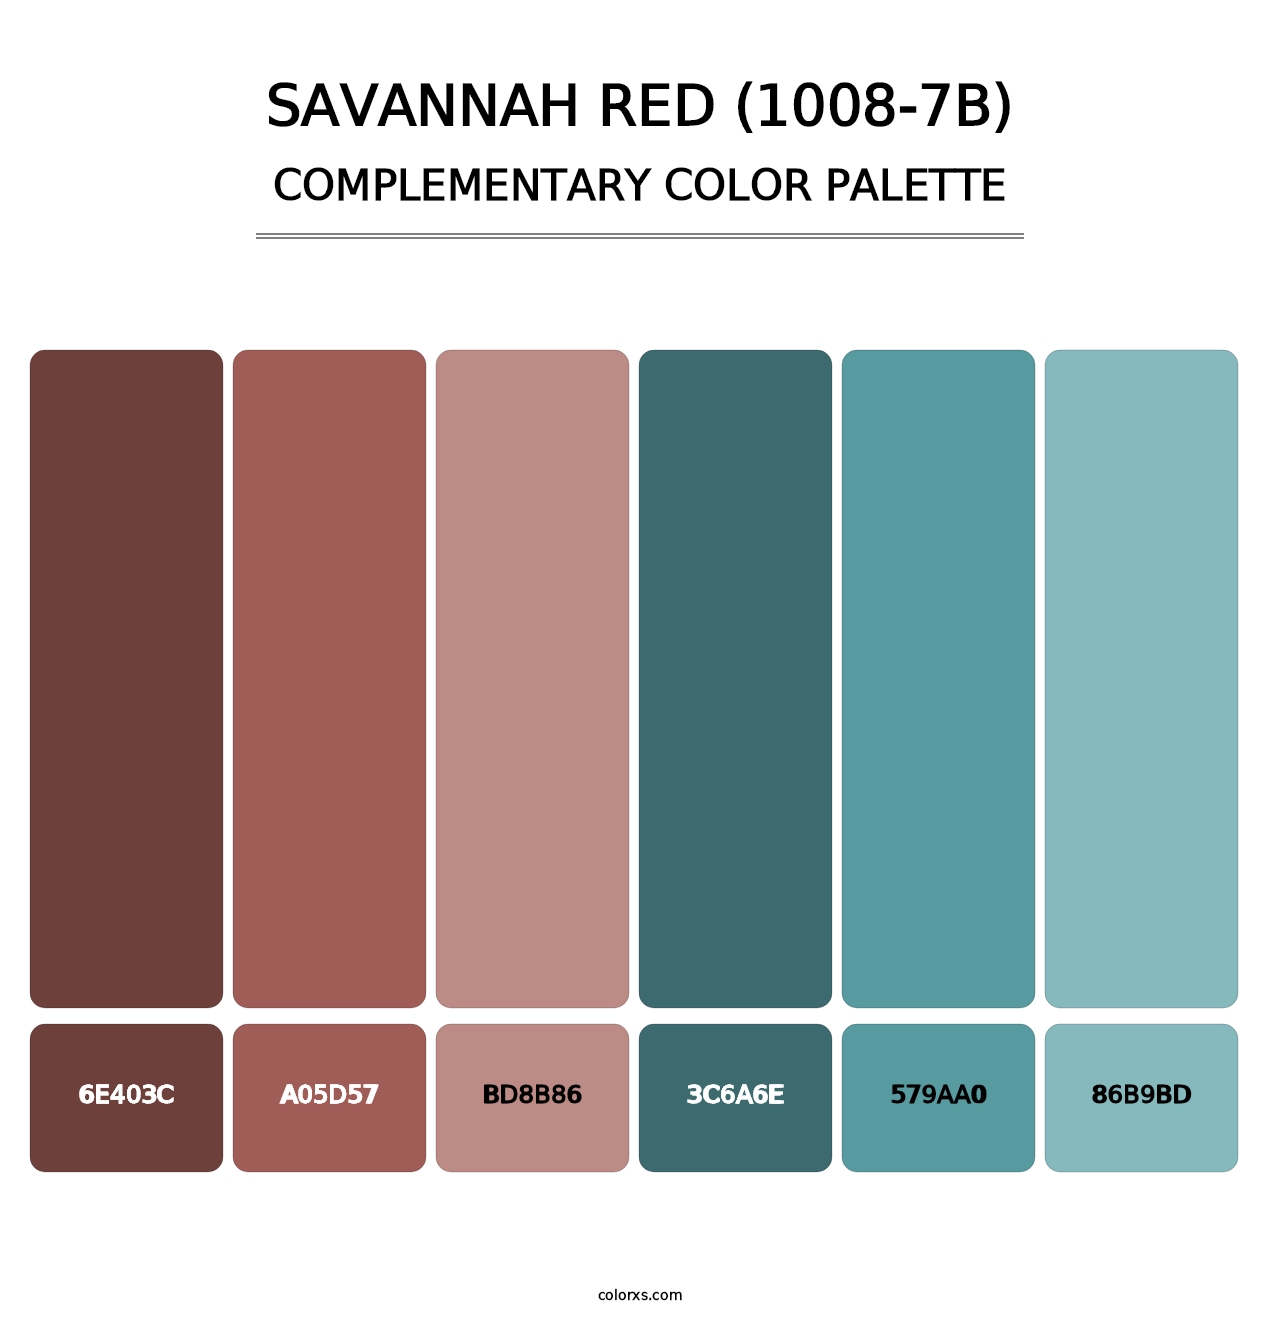 Savannah Red (1008-7B) - Complementary Color Palette